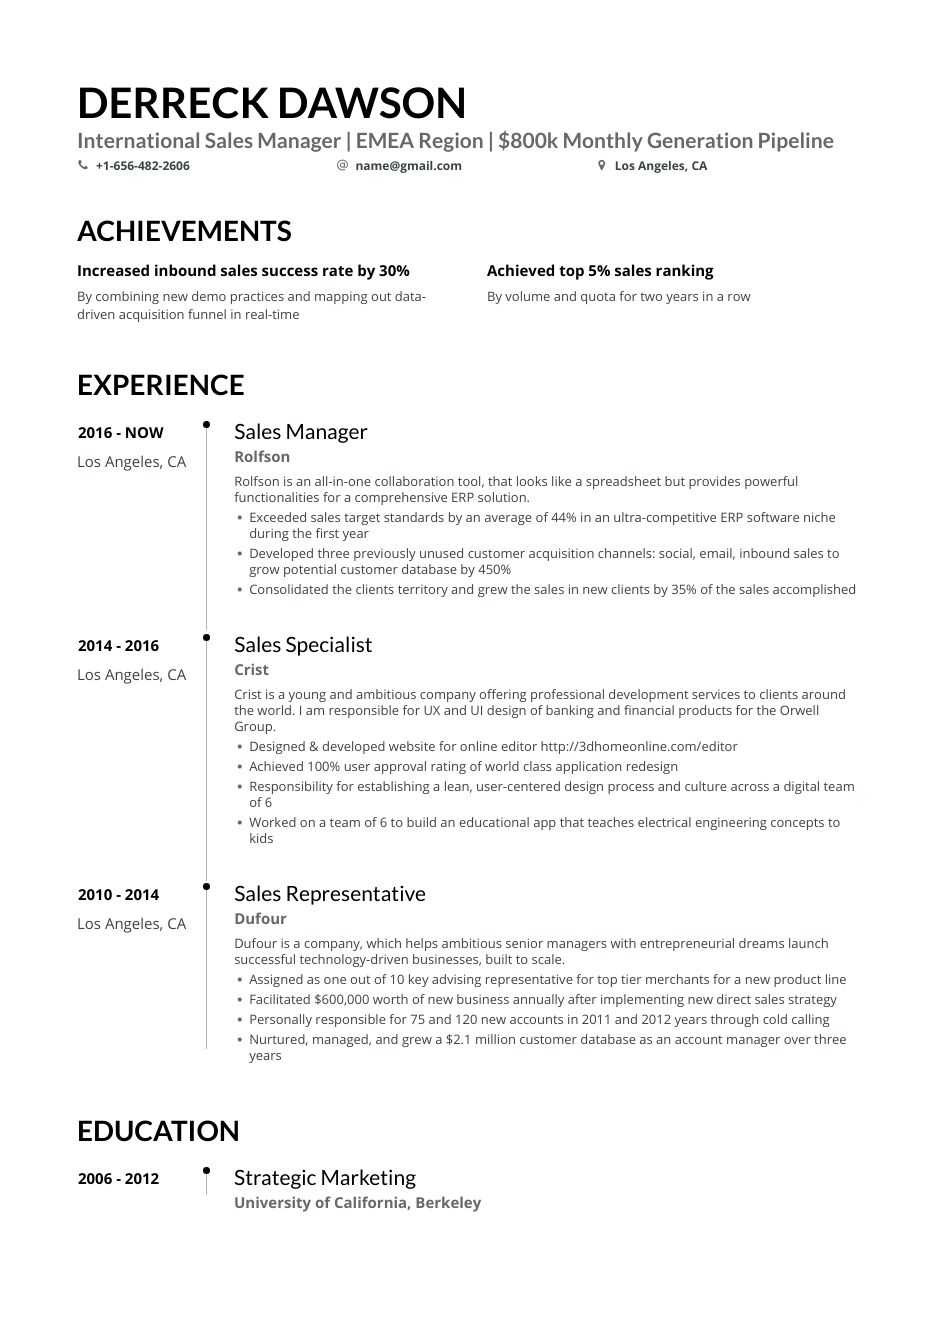 Sample Resume for Sm Department Store Sales Manager: Resume Examples for 2021